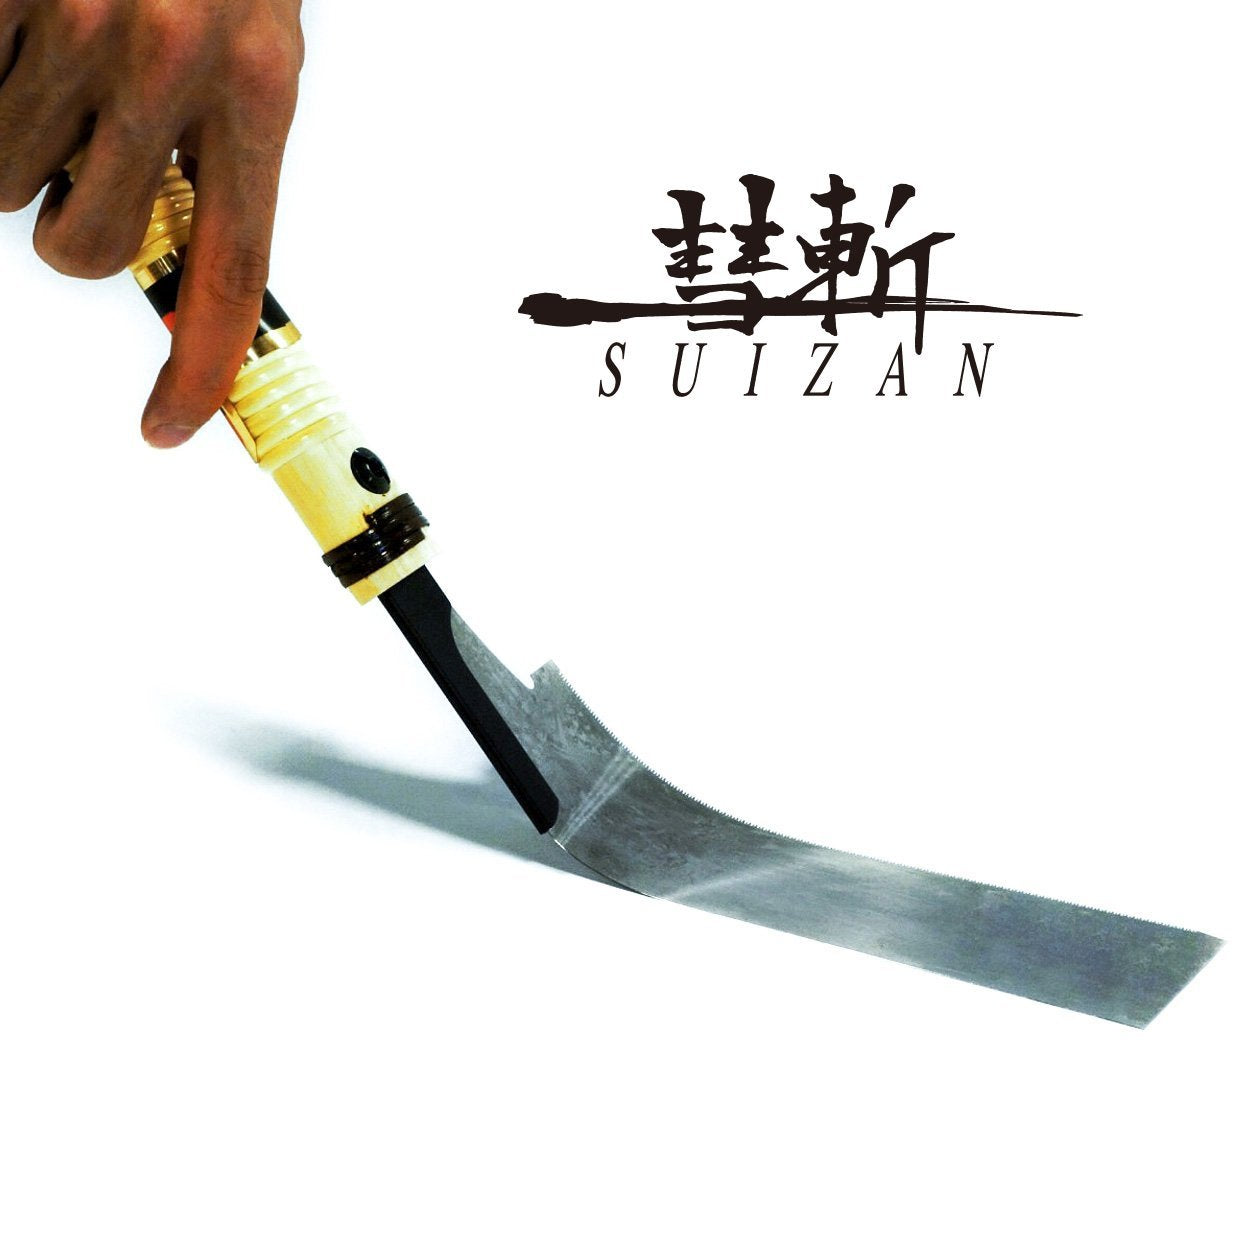 SUIZAN Japanese Saw 7" Flush Cut Saw for Trimming